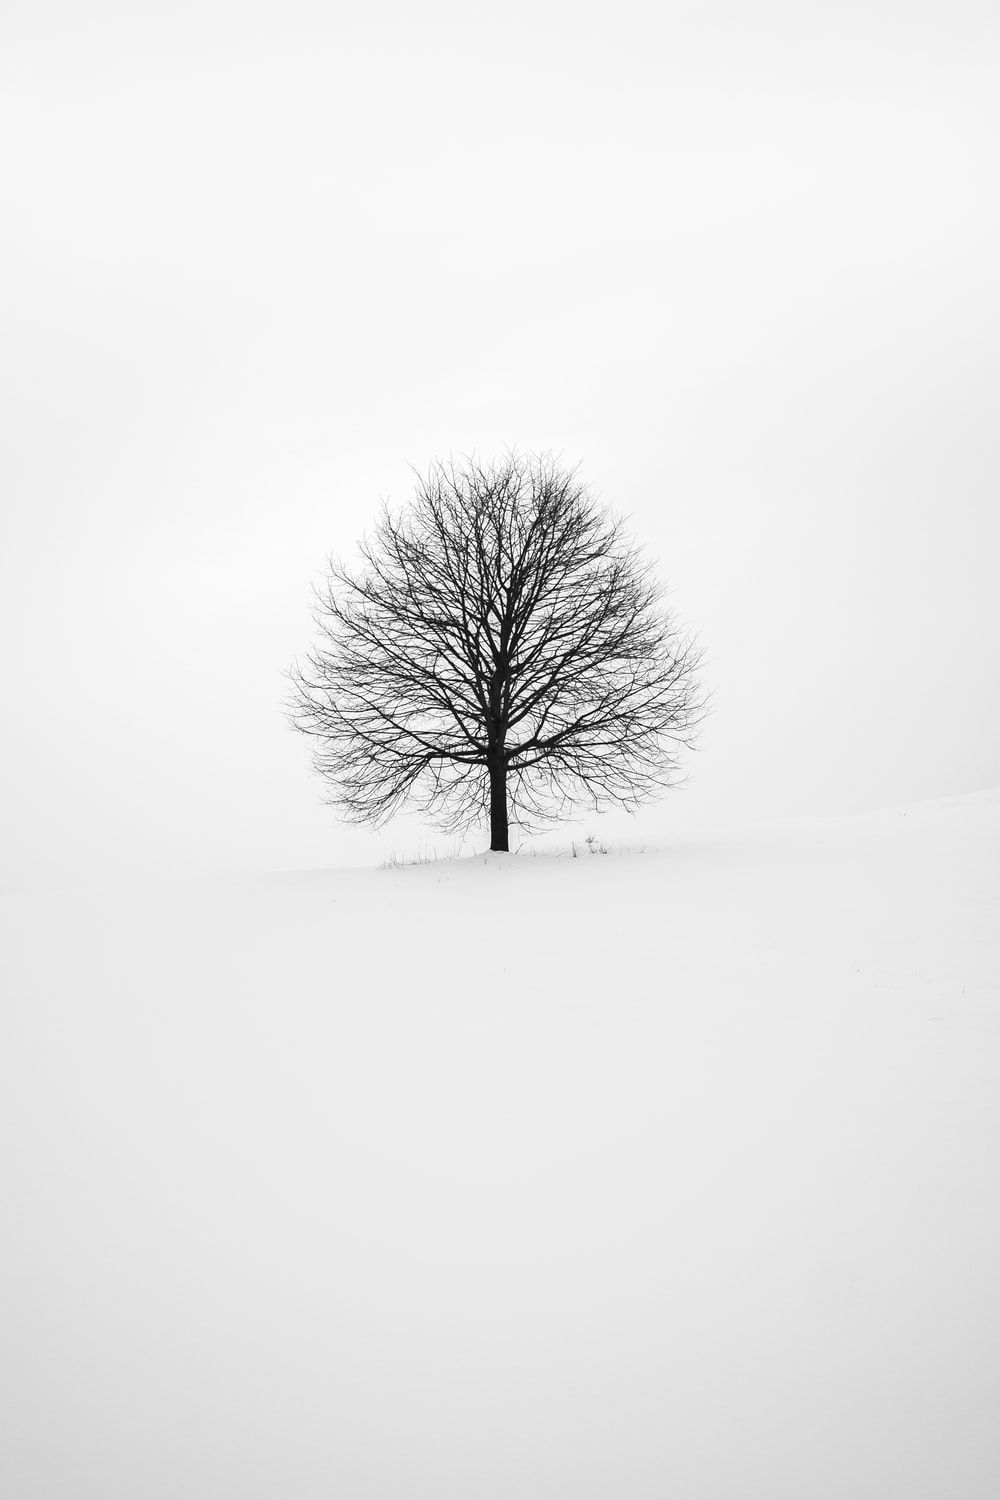 Black And White Tree Picture. Download Free Image